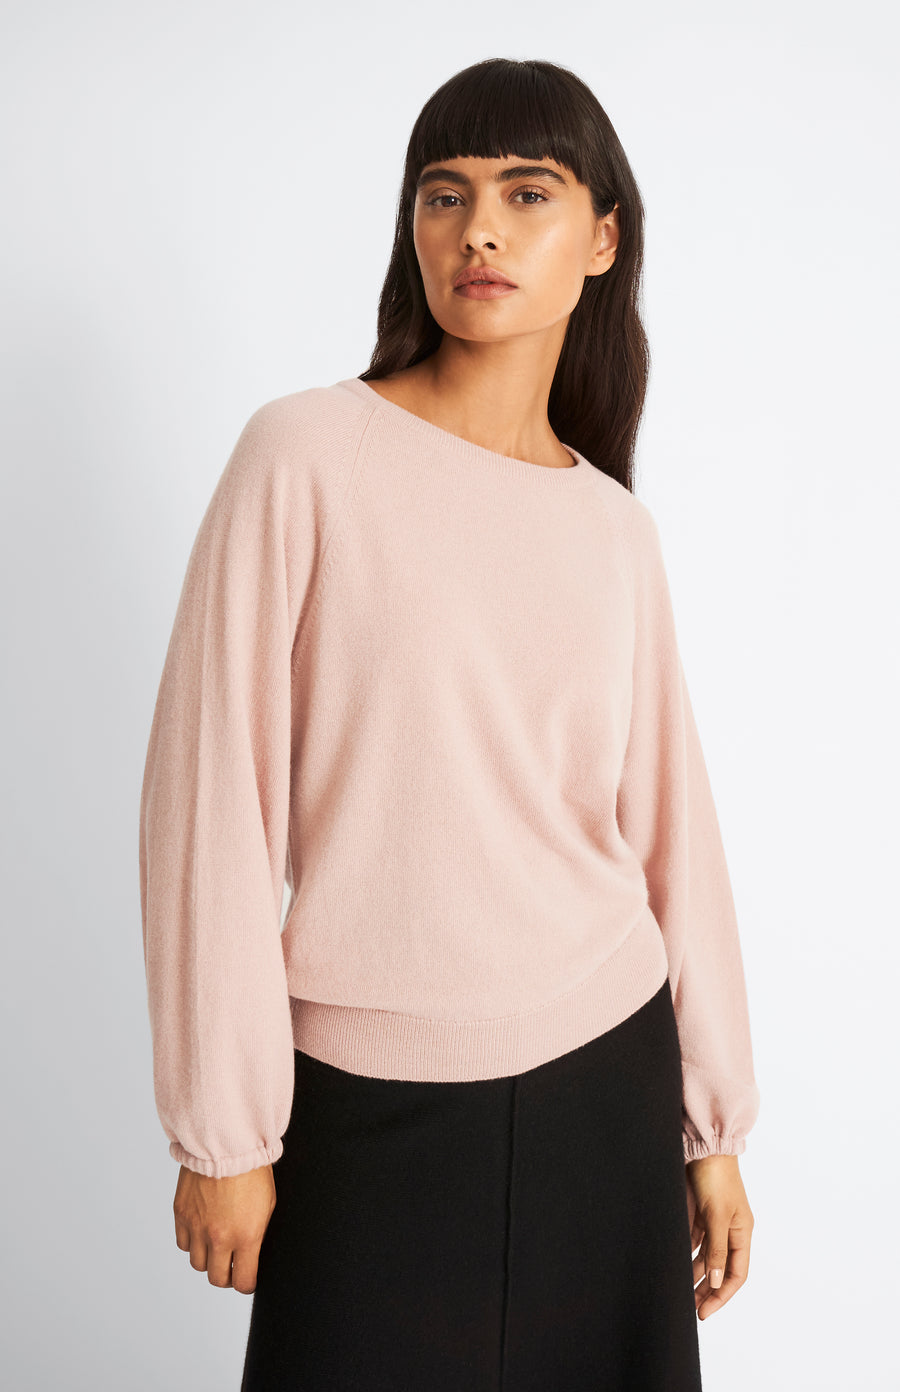 Pringle Women's Lightweight Round Neck Cashmere Jumper in Dusty Pink on model